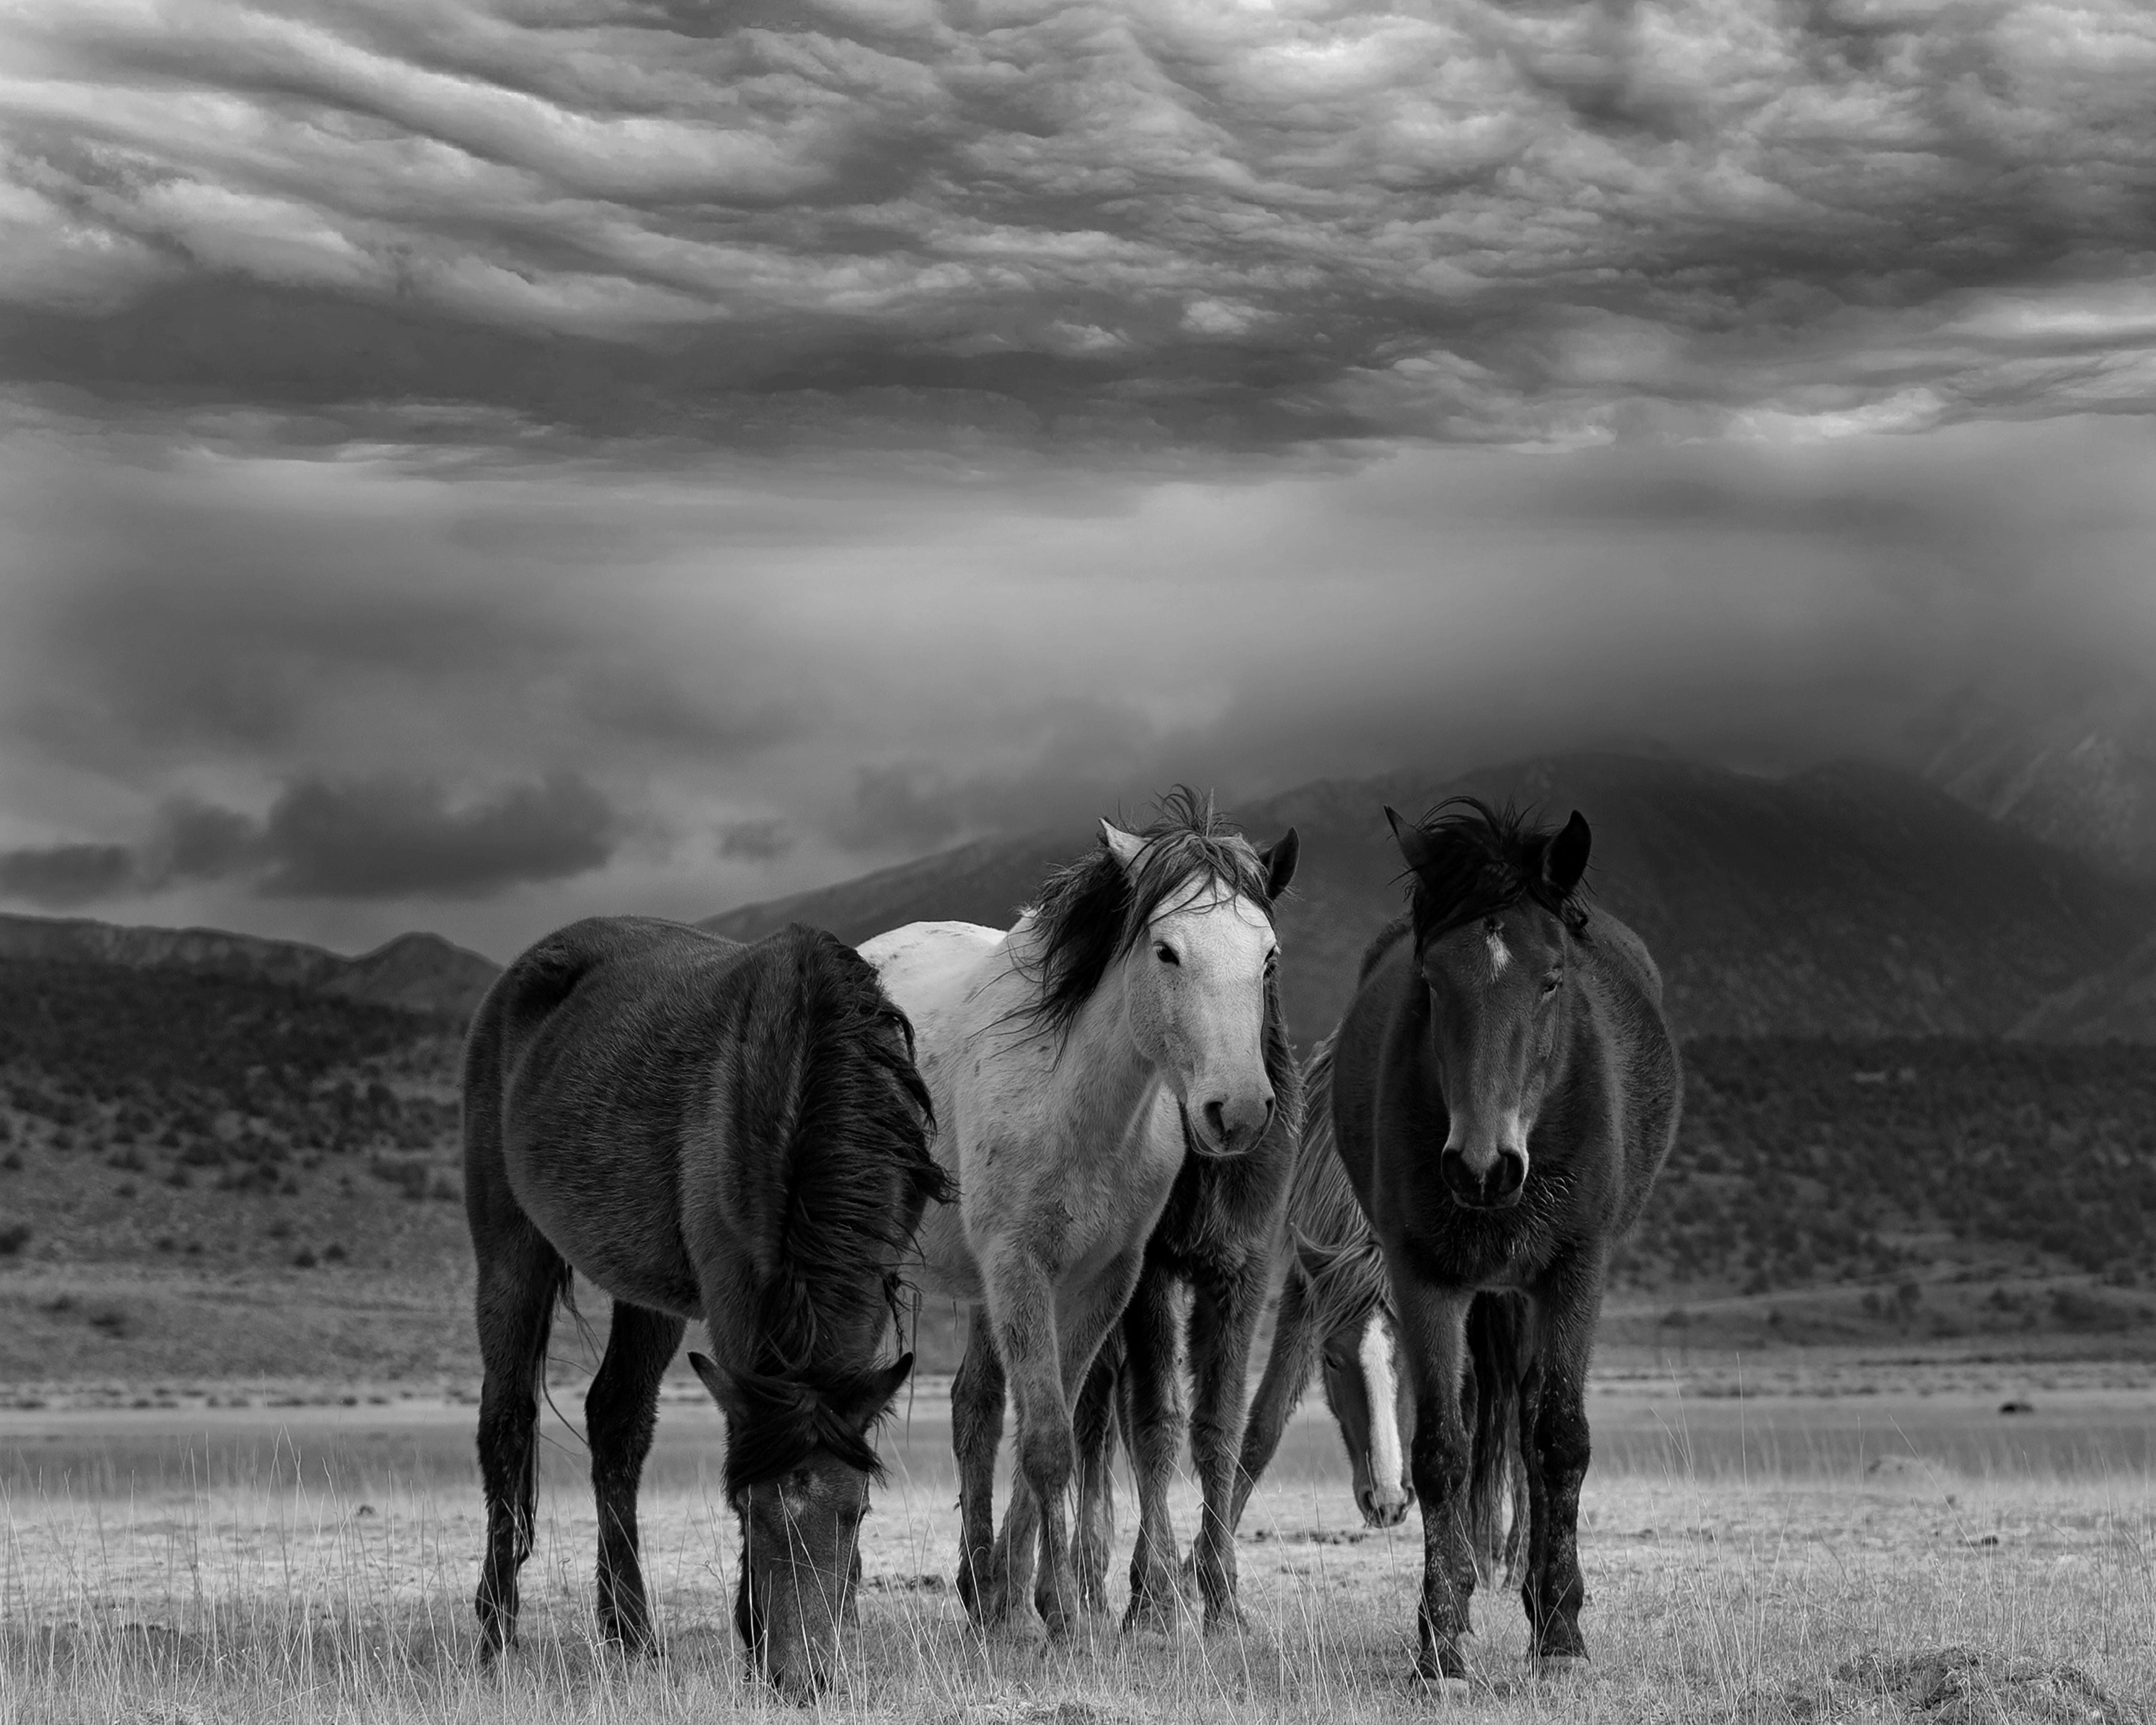 Shane Russeck Animal Print - "Dust and Horses" 50x60 Black and White Photography Wild Horses Mustangs Art